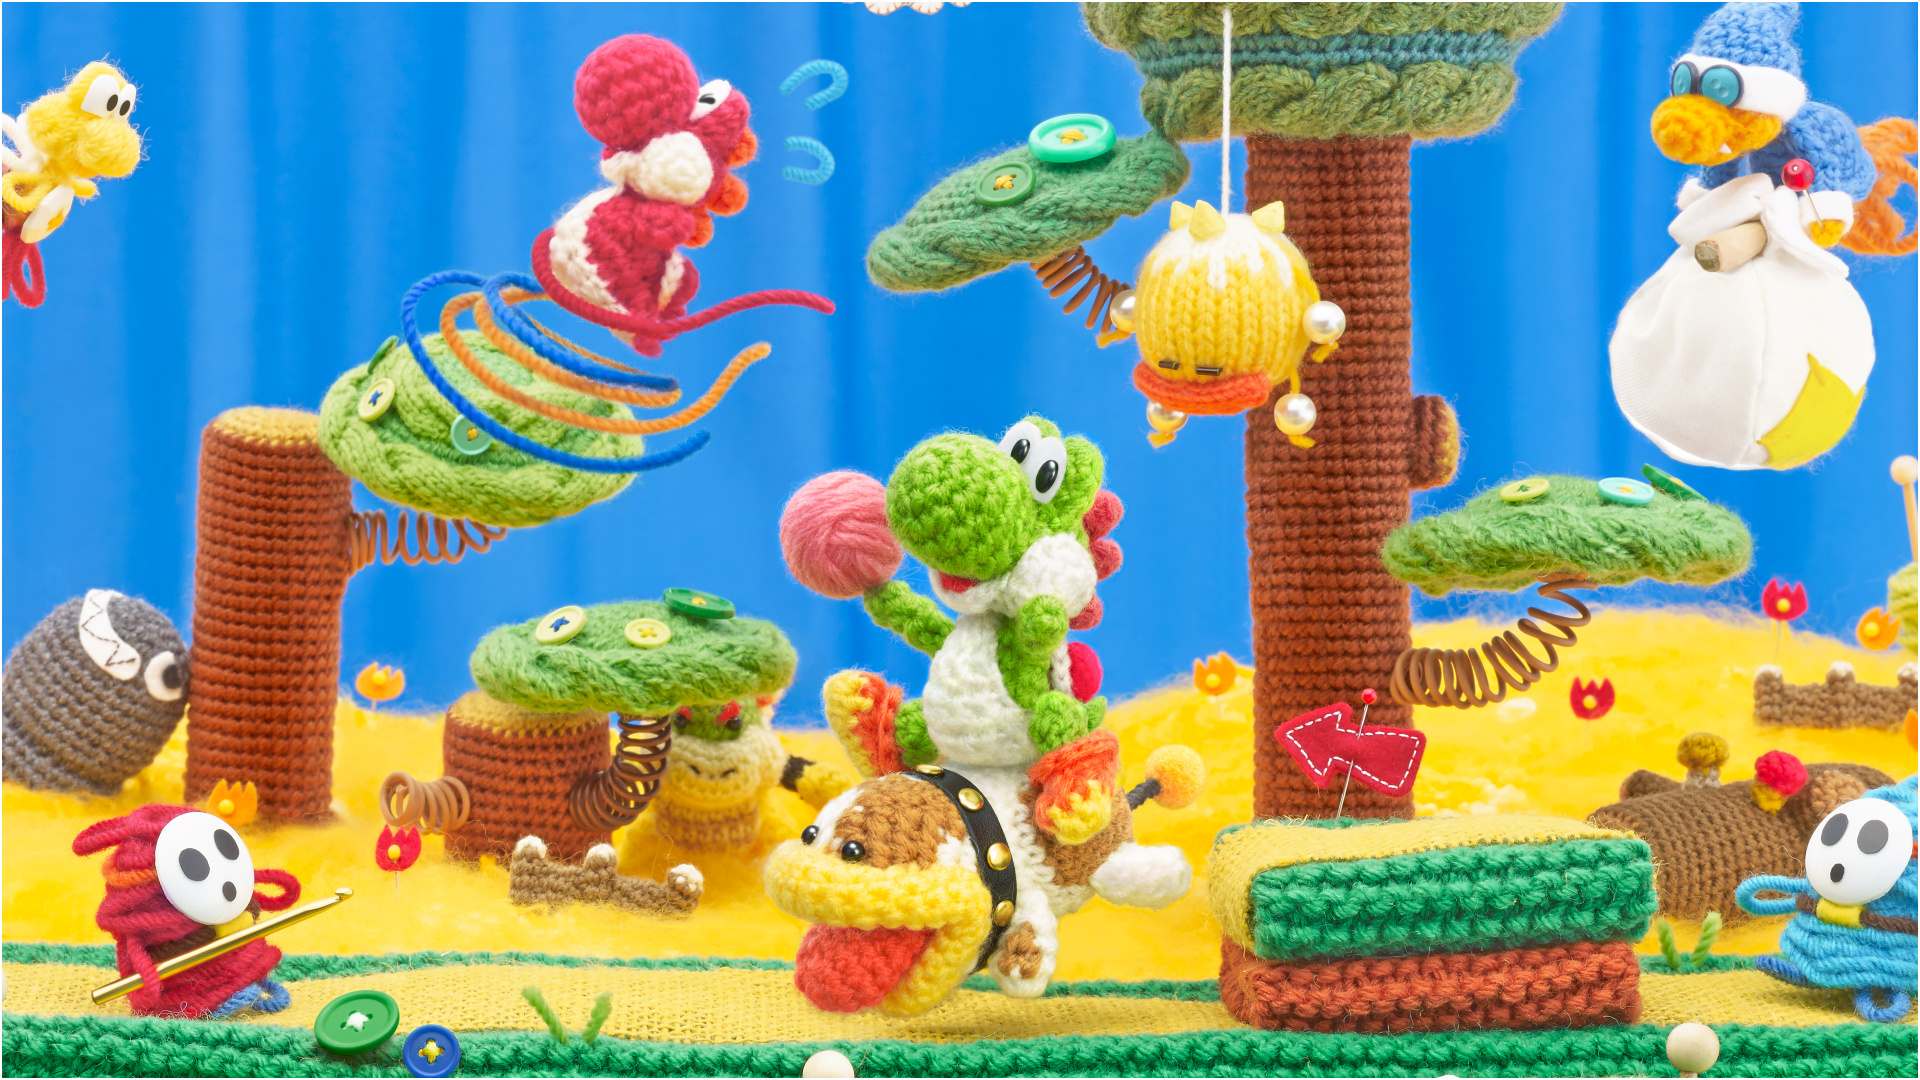 yoshis woolly world review